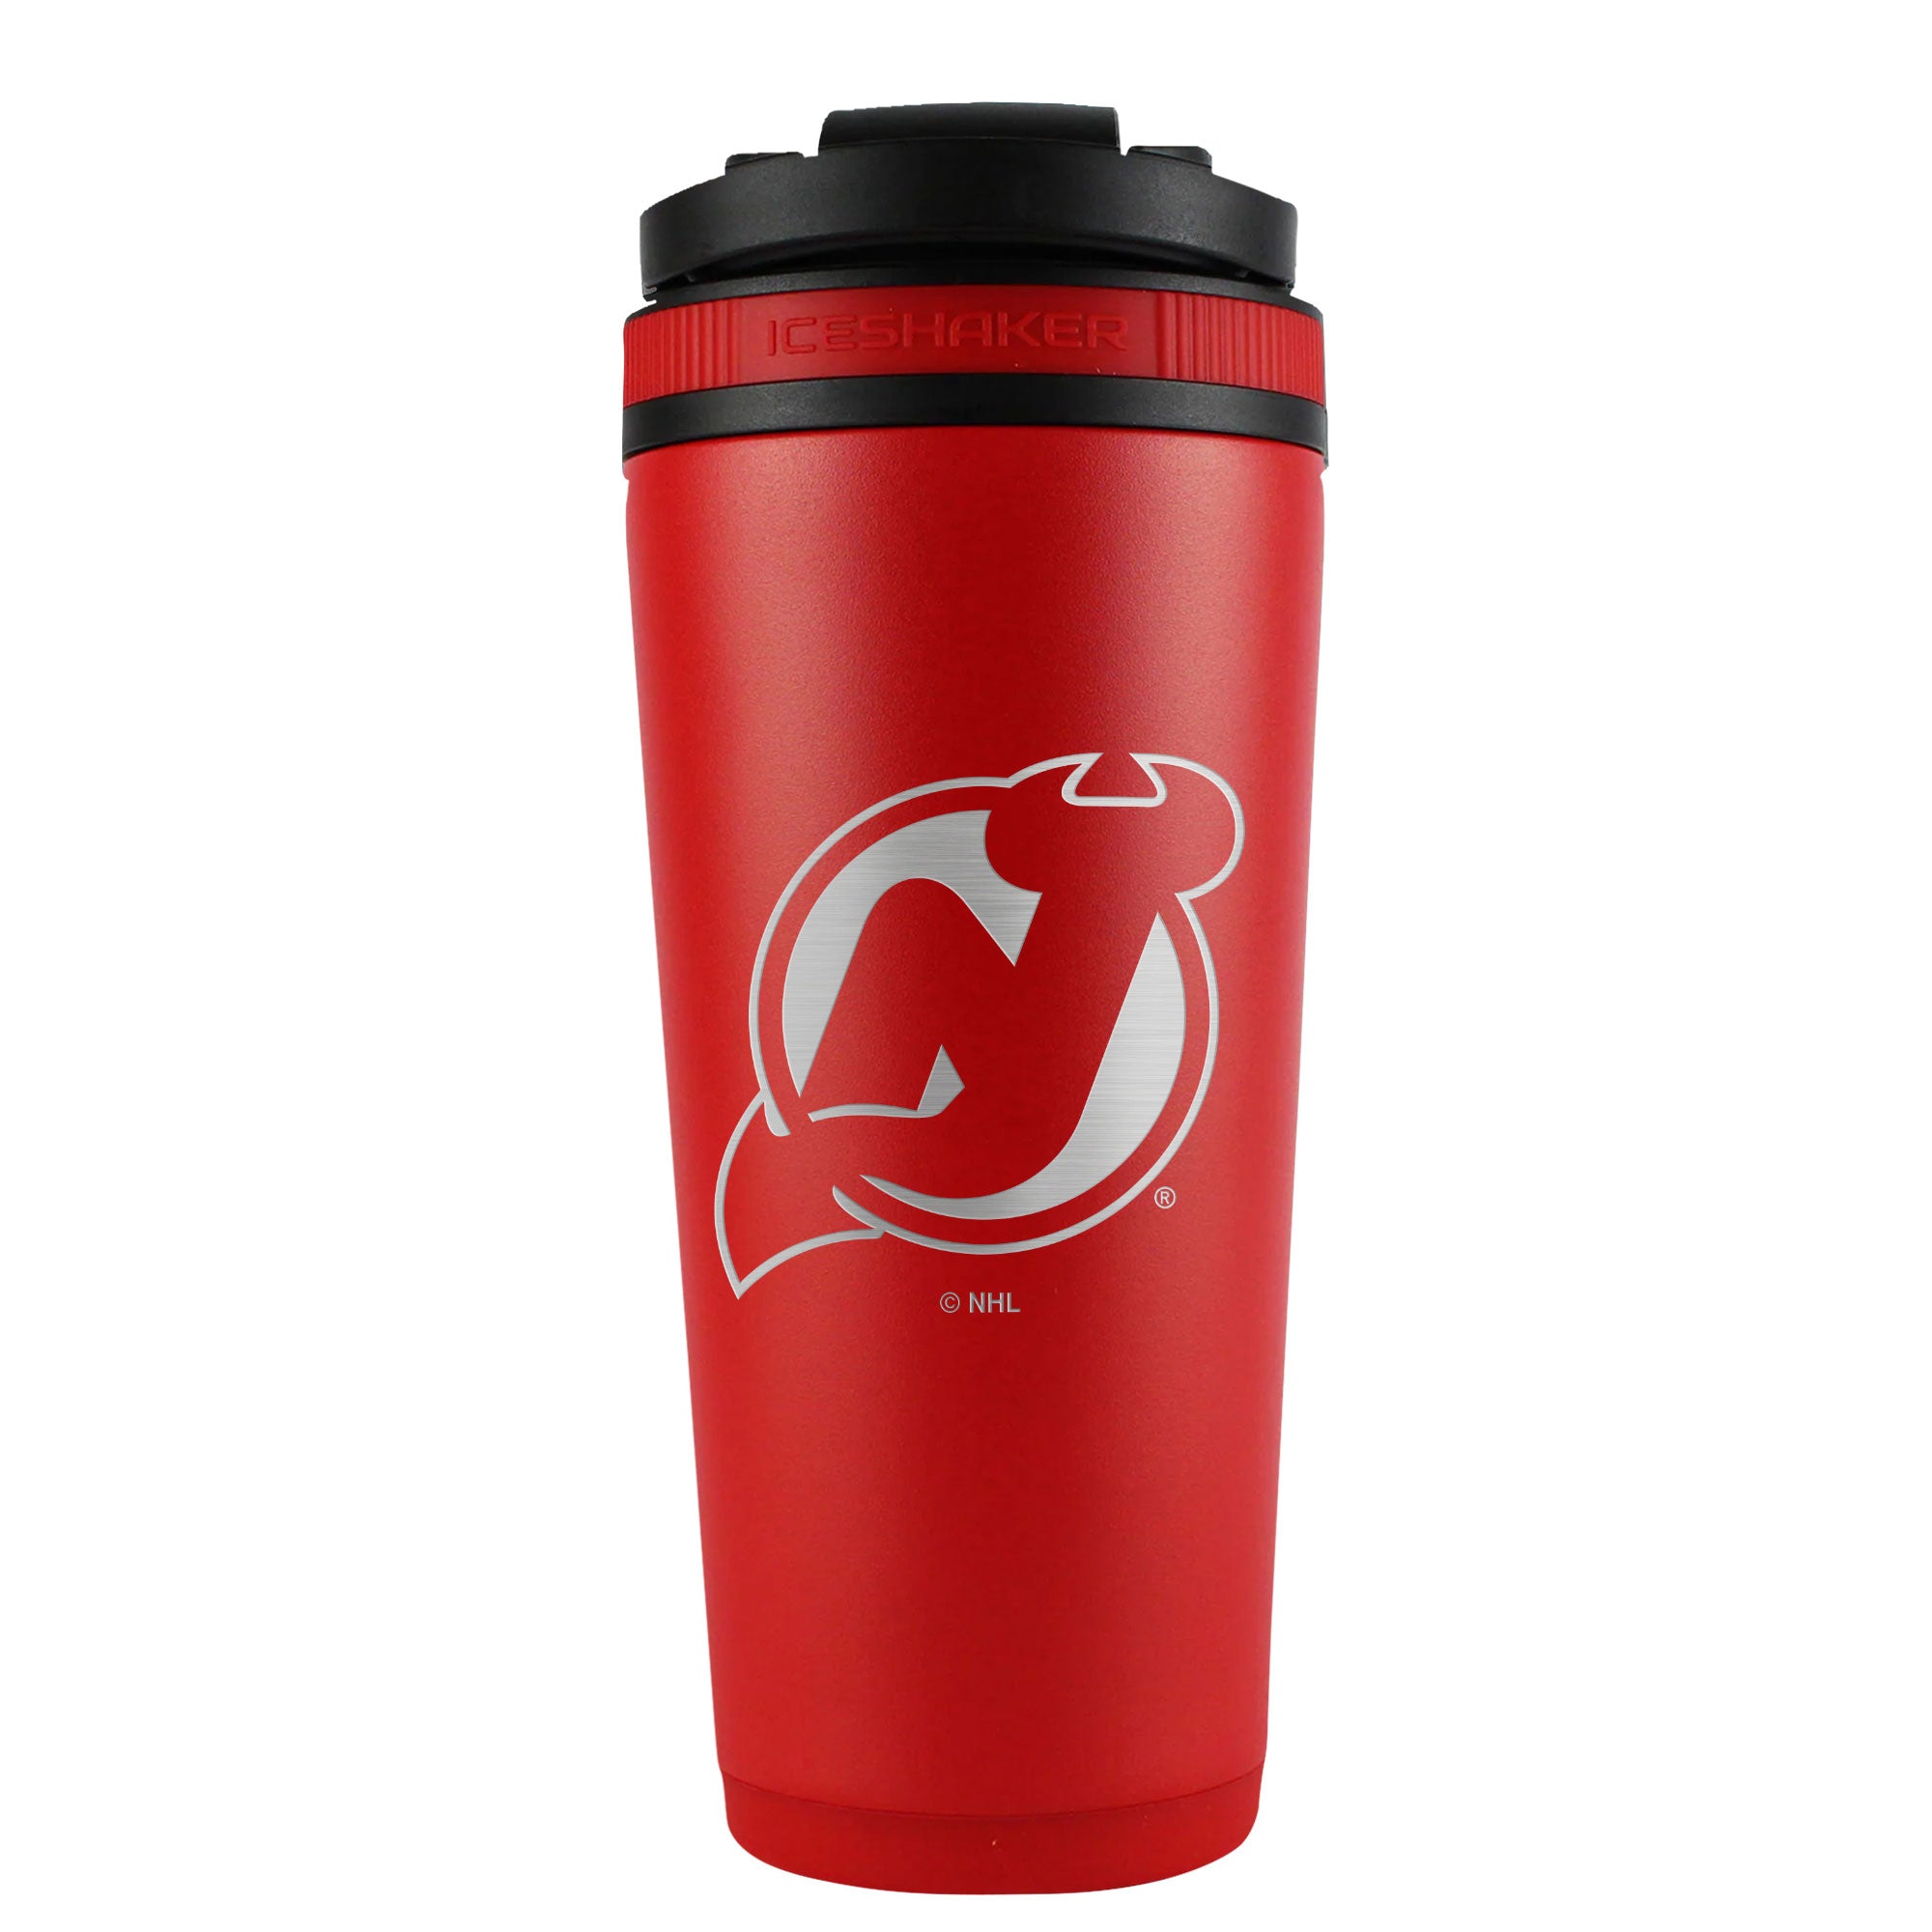 Officially Licensed New Jersey Devils 26oz Ice Shaker - Red